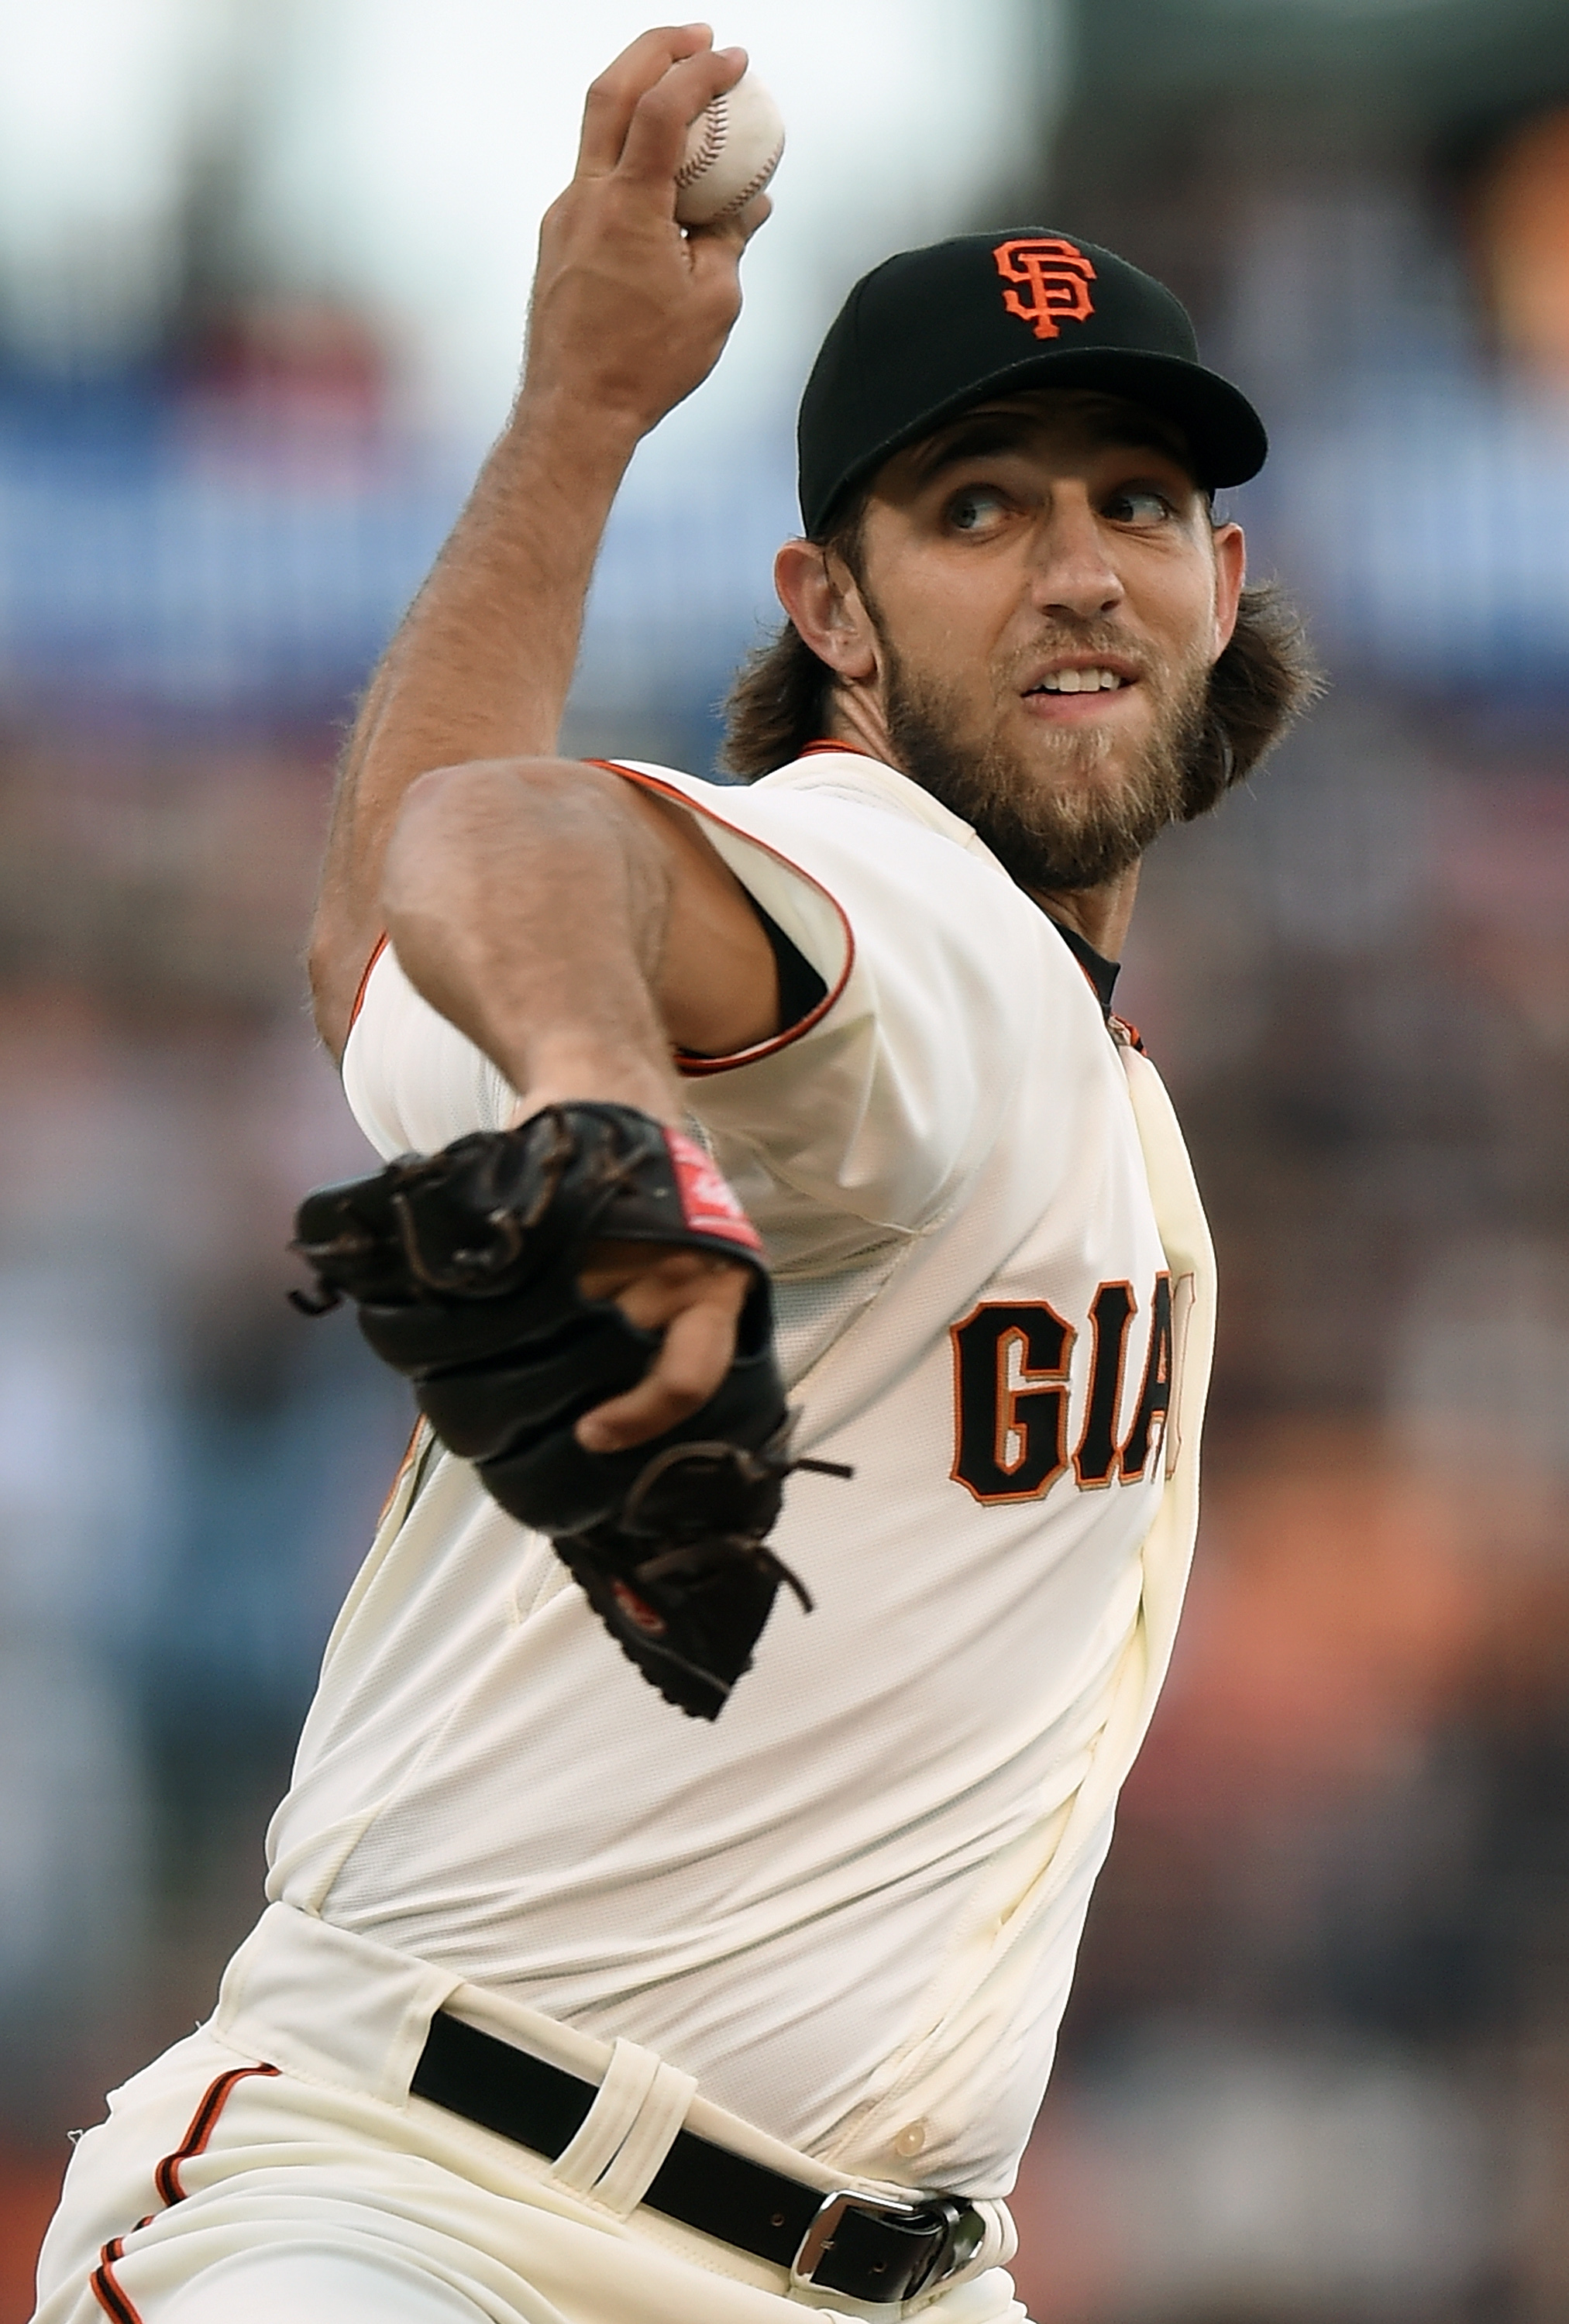 Is Madison Bumgarner Single? The Giants Pitcher's Status Follows a